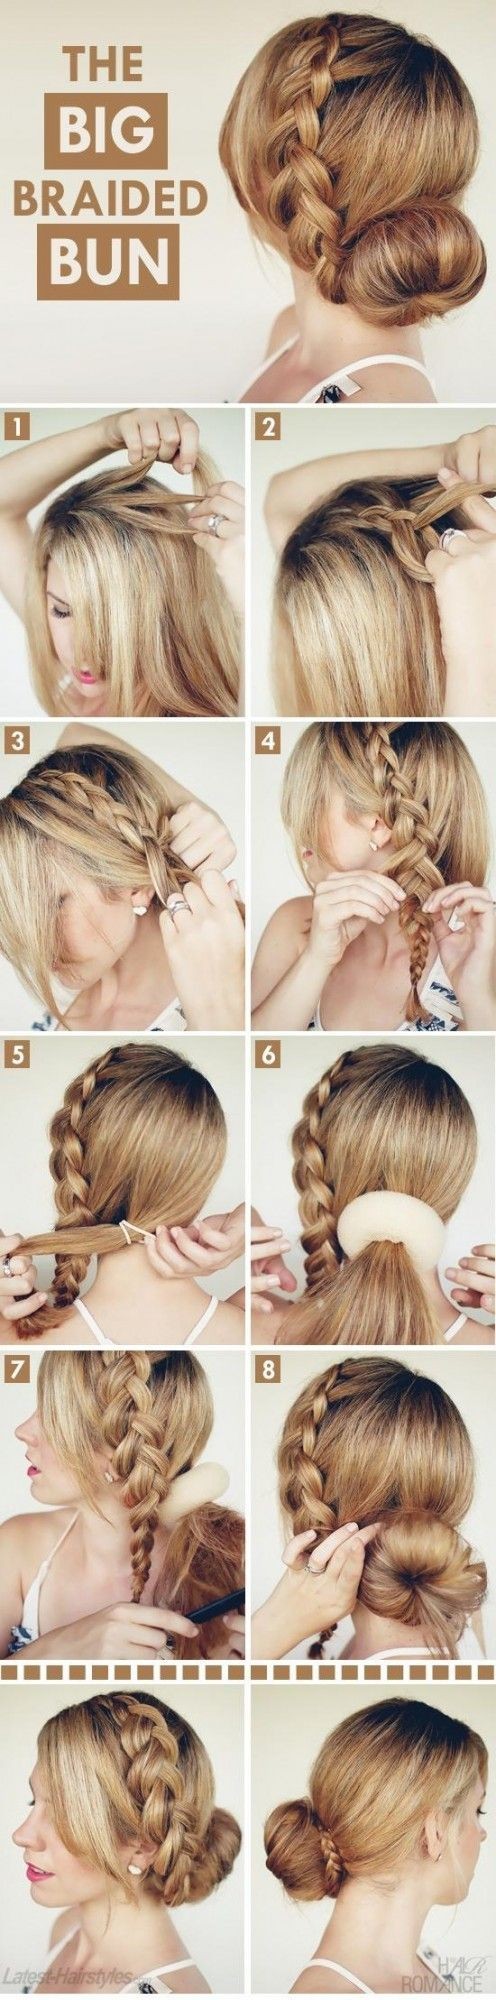 Side braid with low bun homecoming hairstyle  - 7...